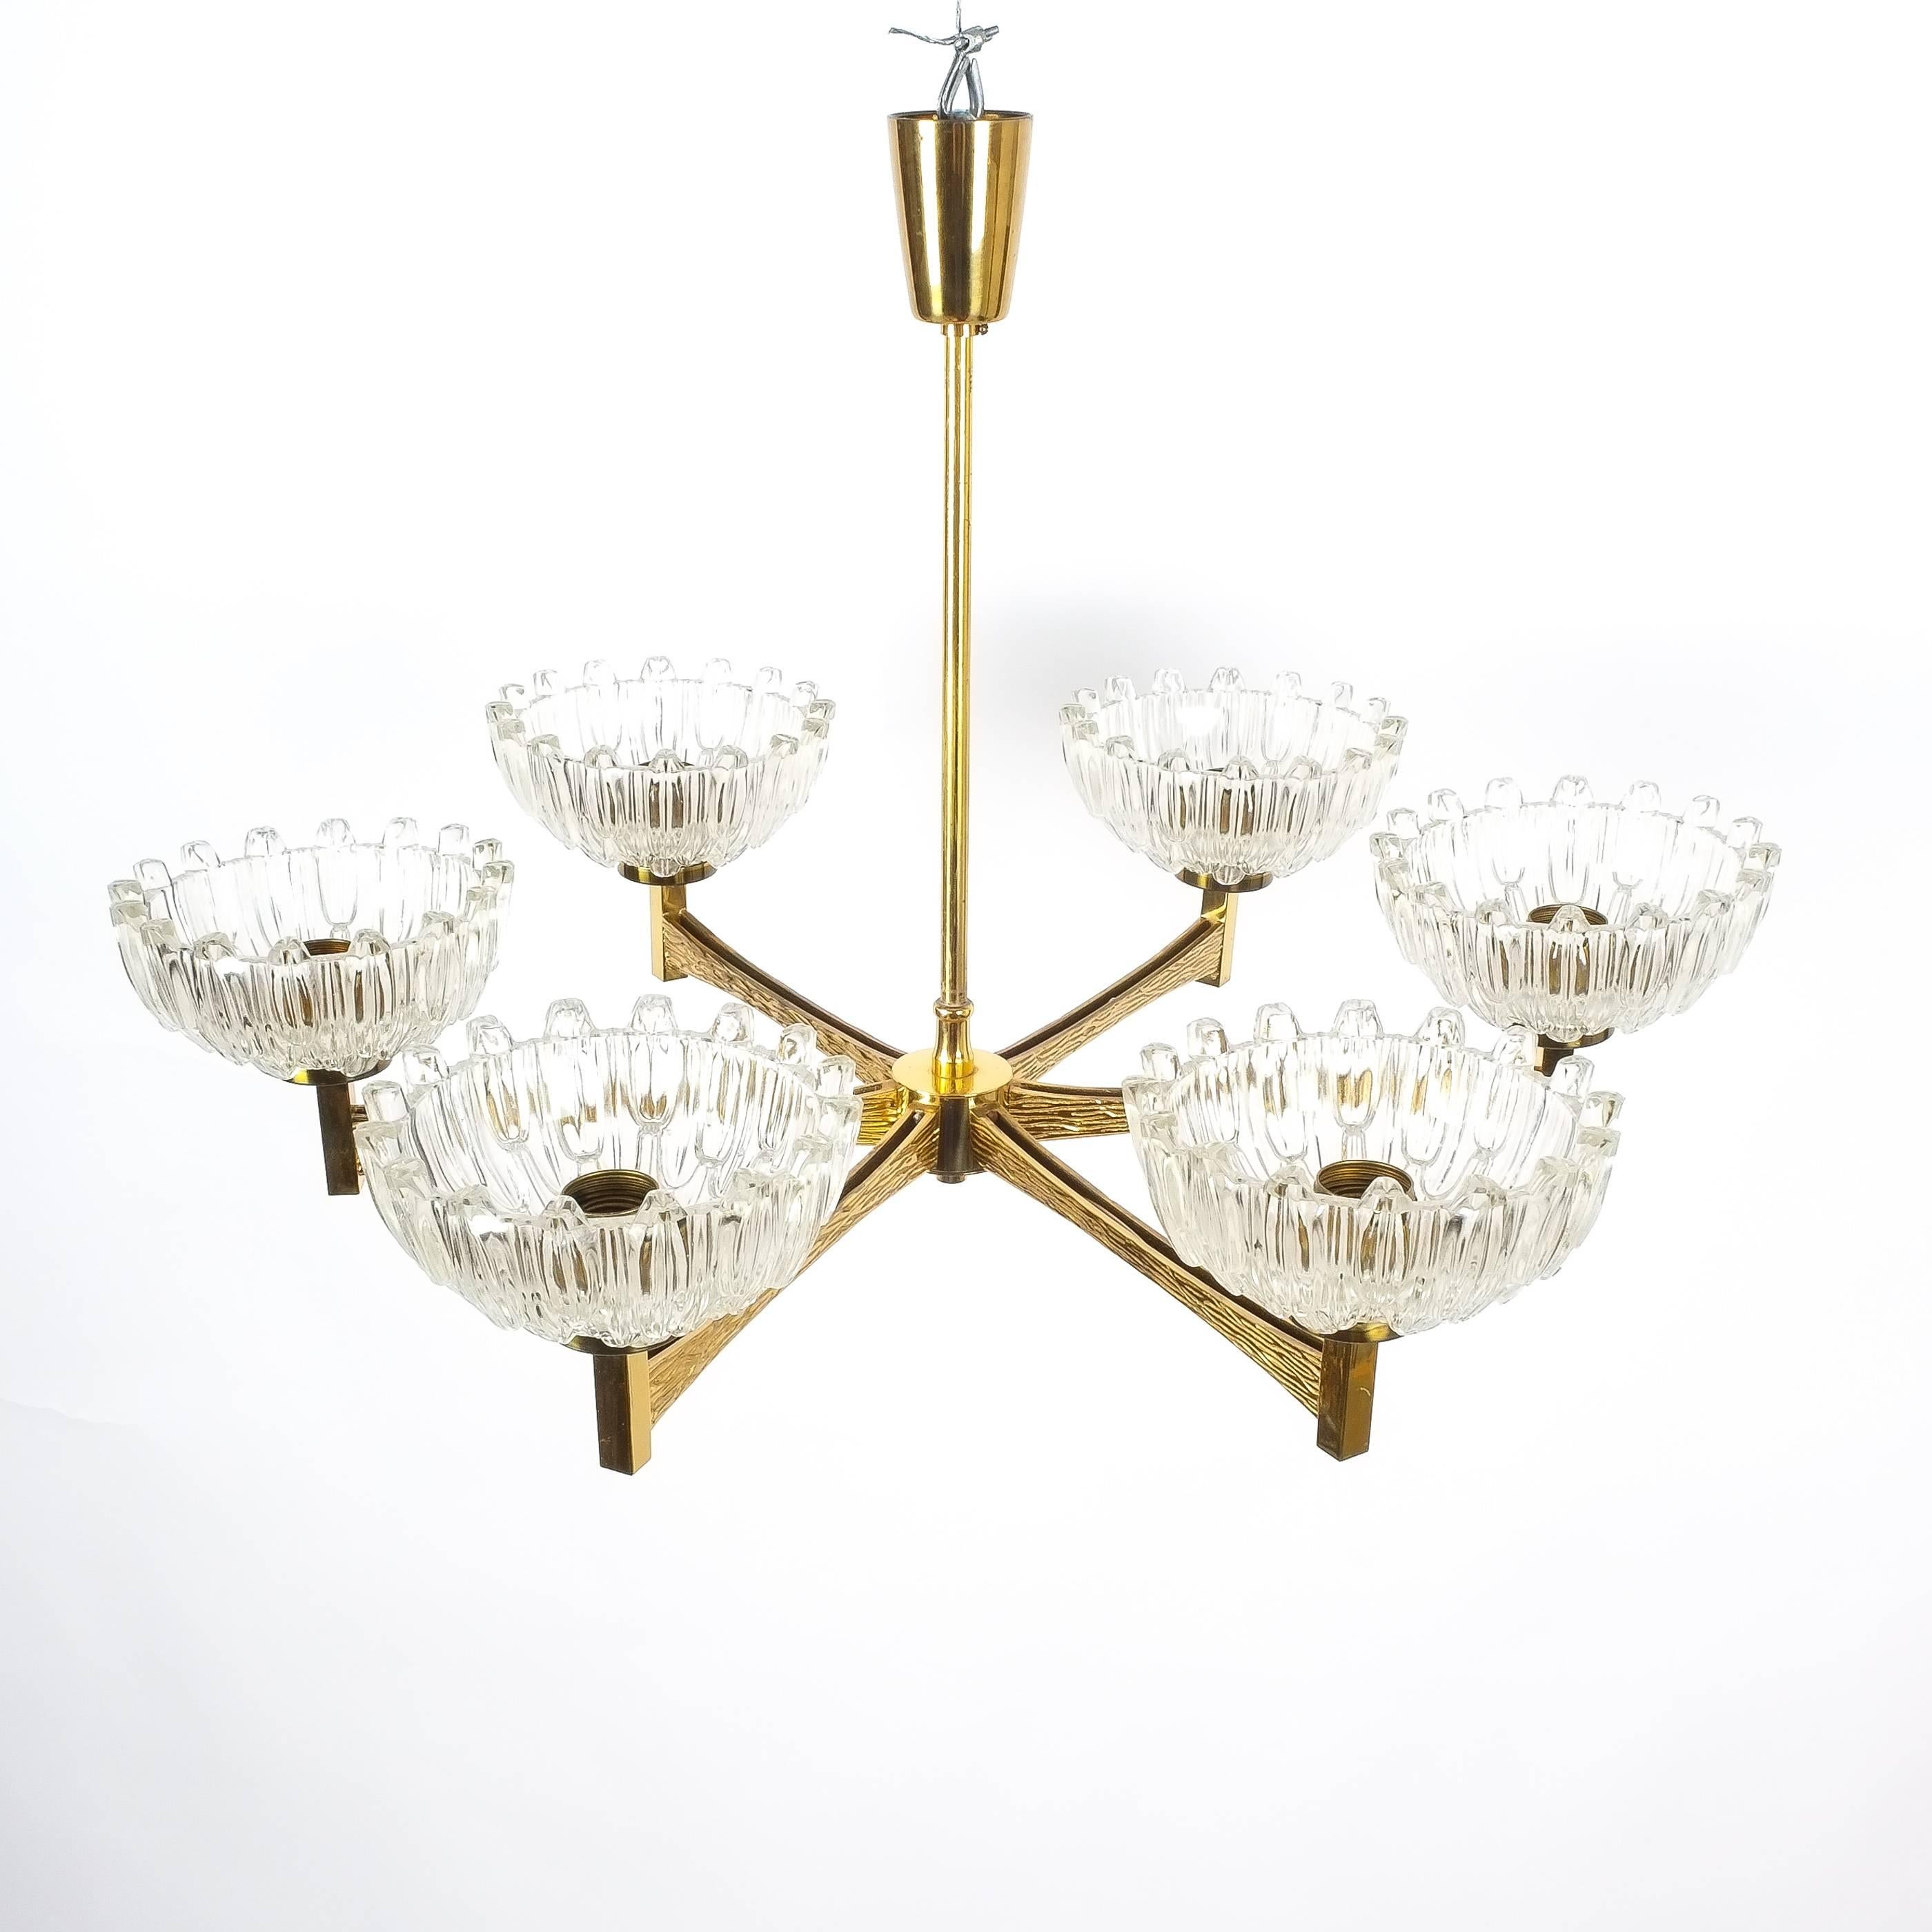 Swedish Hans-Agne Jakobsson Attributed Six-Arm Chandelier from Brass Glass, 1960 For Sale